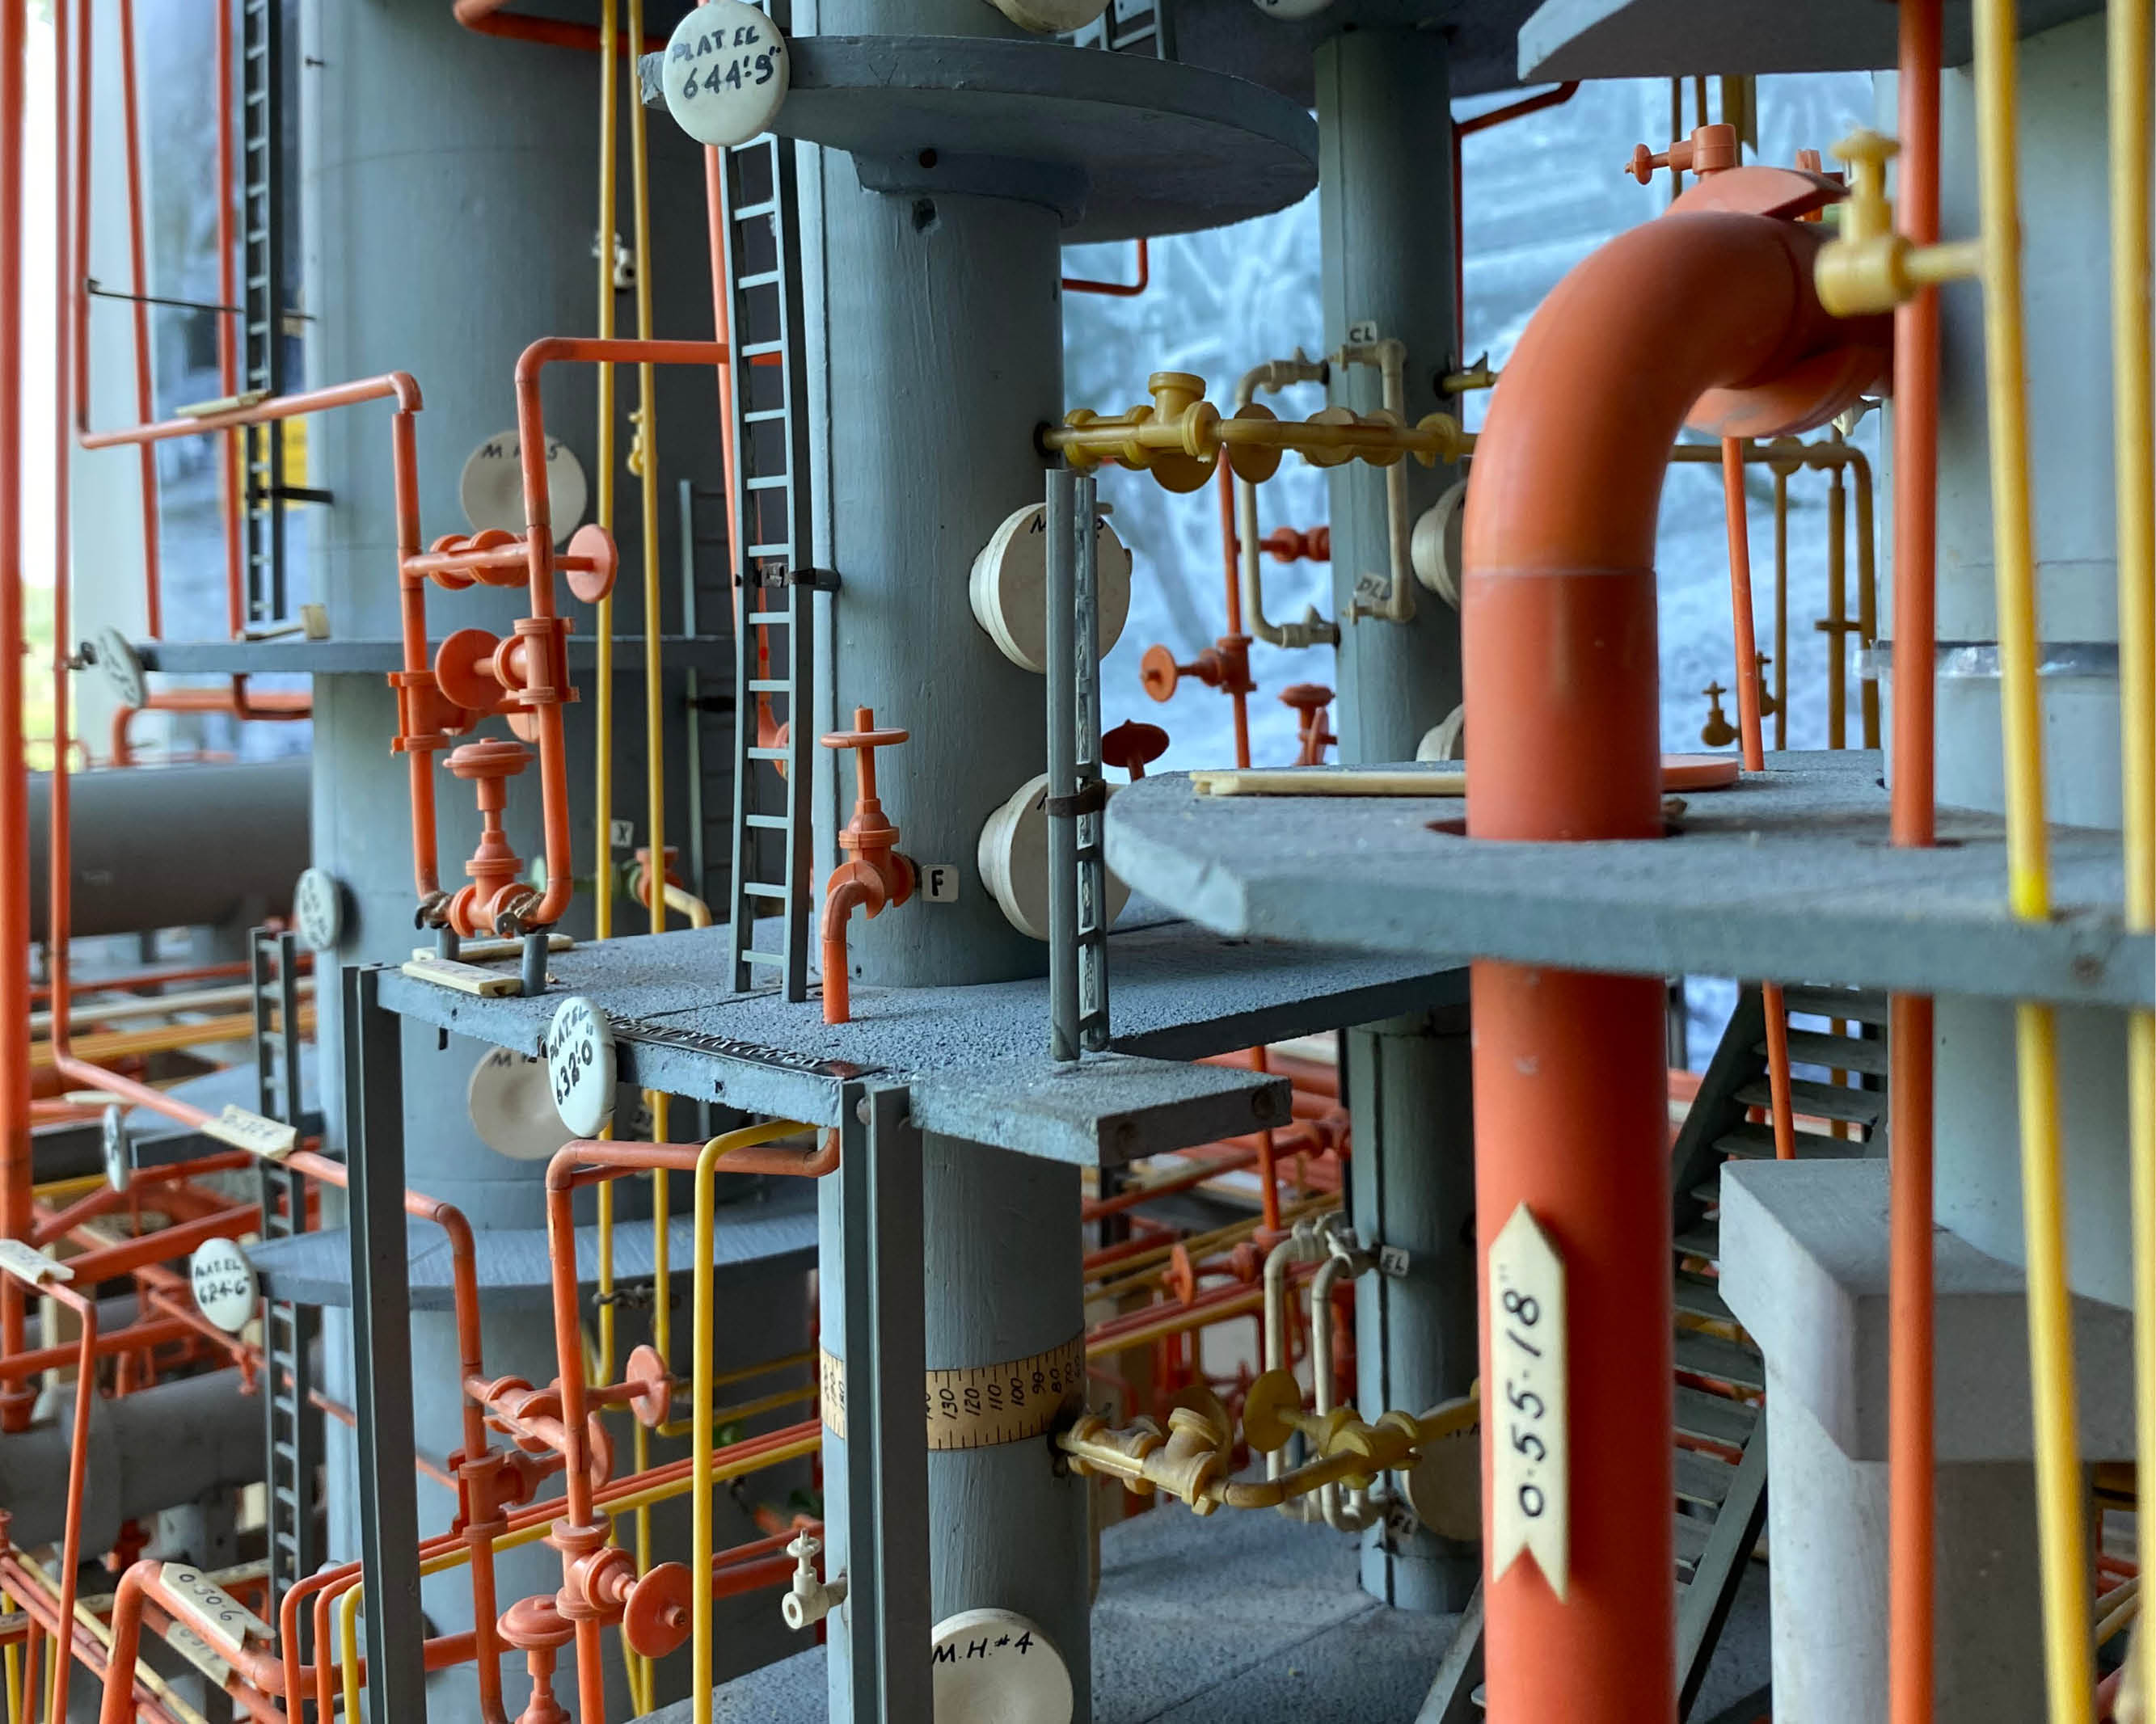 A close-up view of the Shell Refinery Model in the Oil Museum's main gallery.